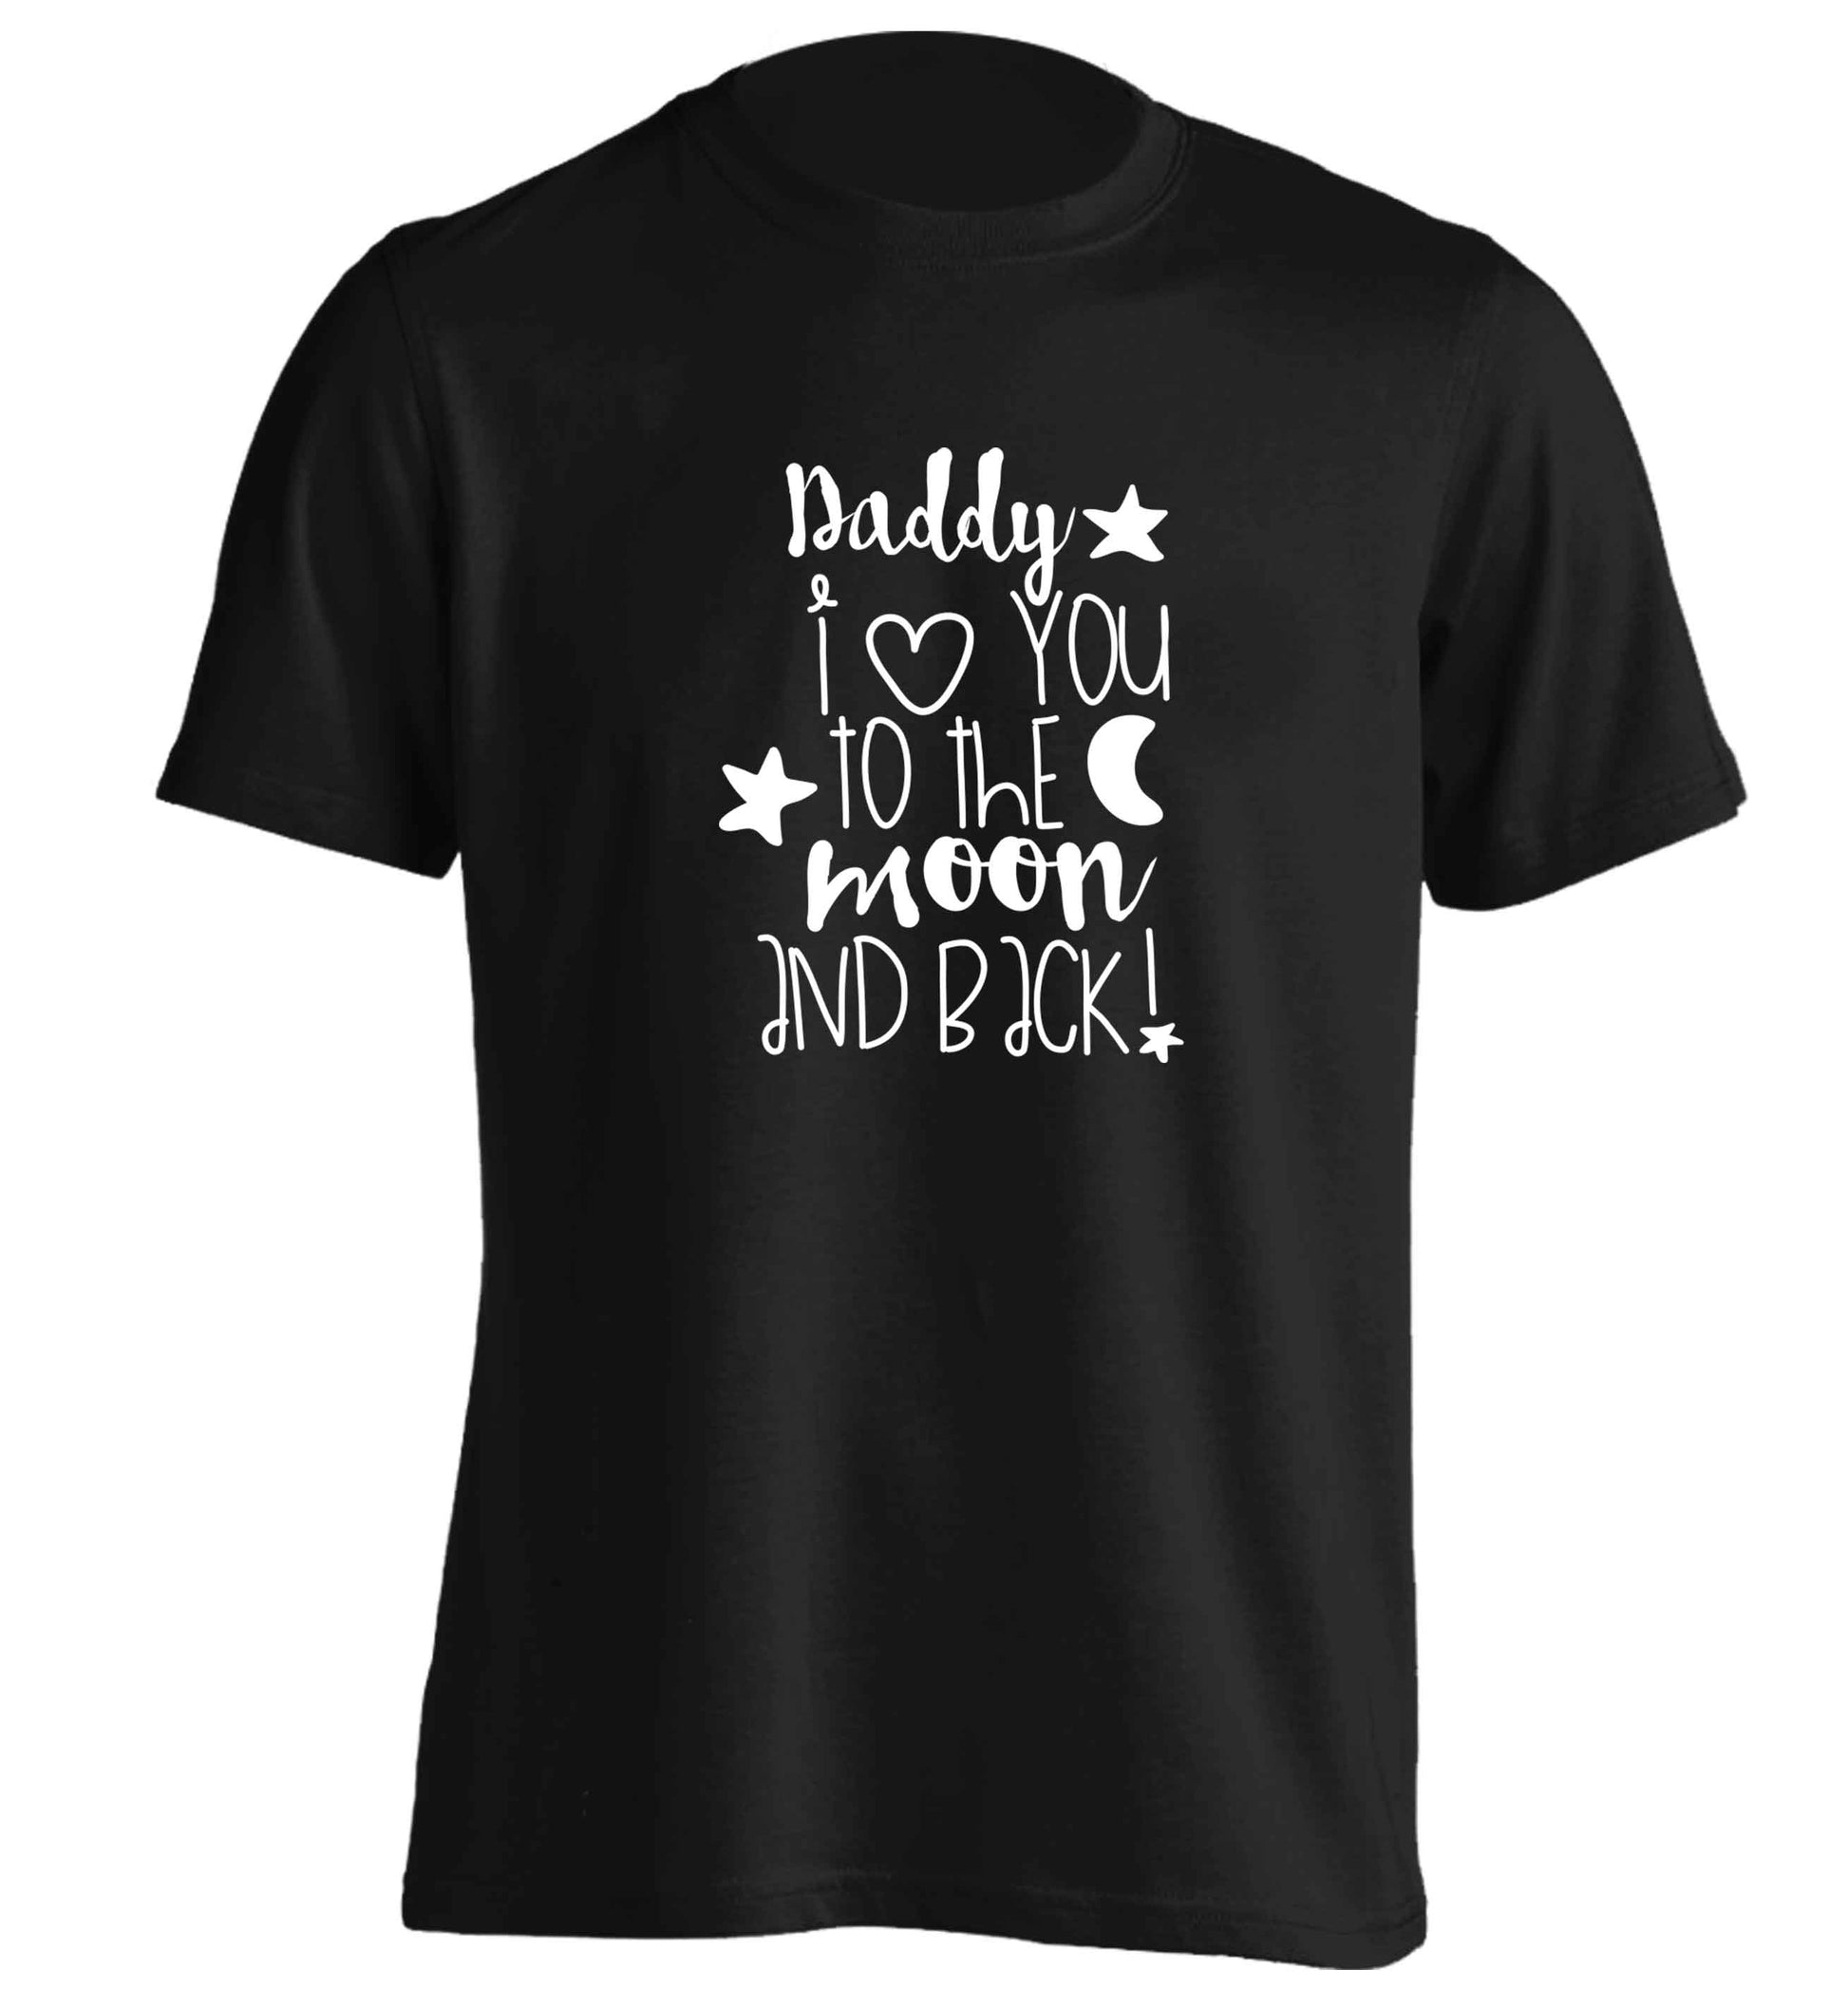 Daddy I love you to the moon and back adults unisex black Tshirt 2XL